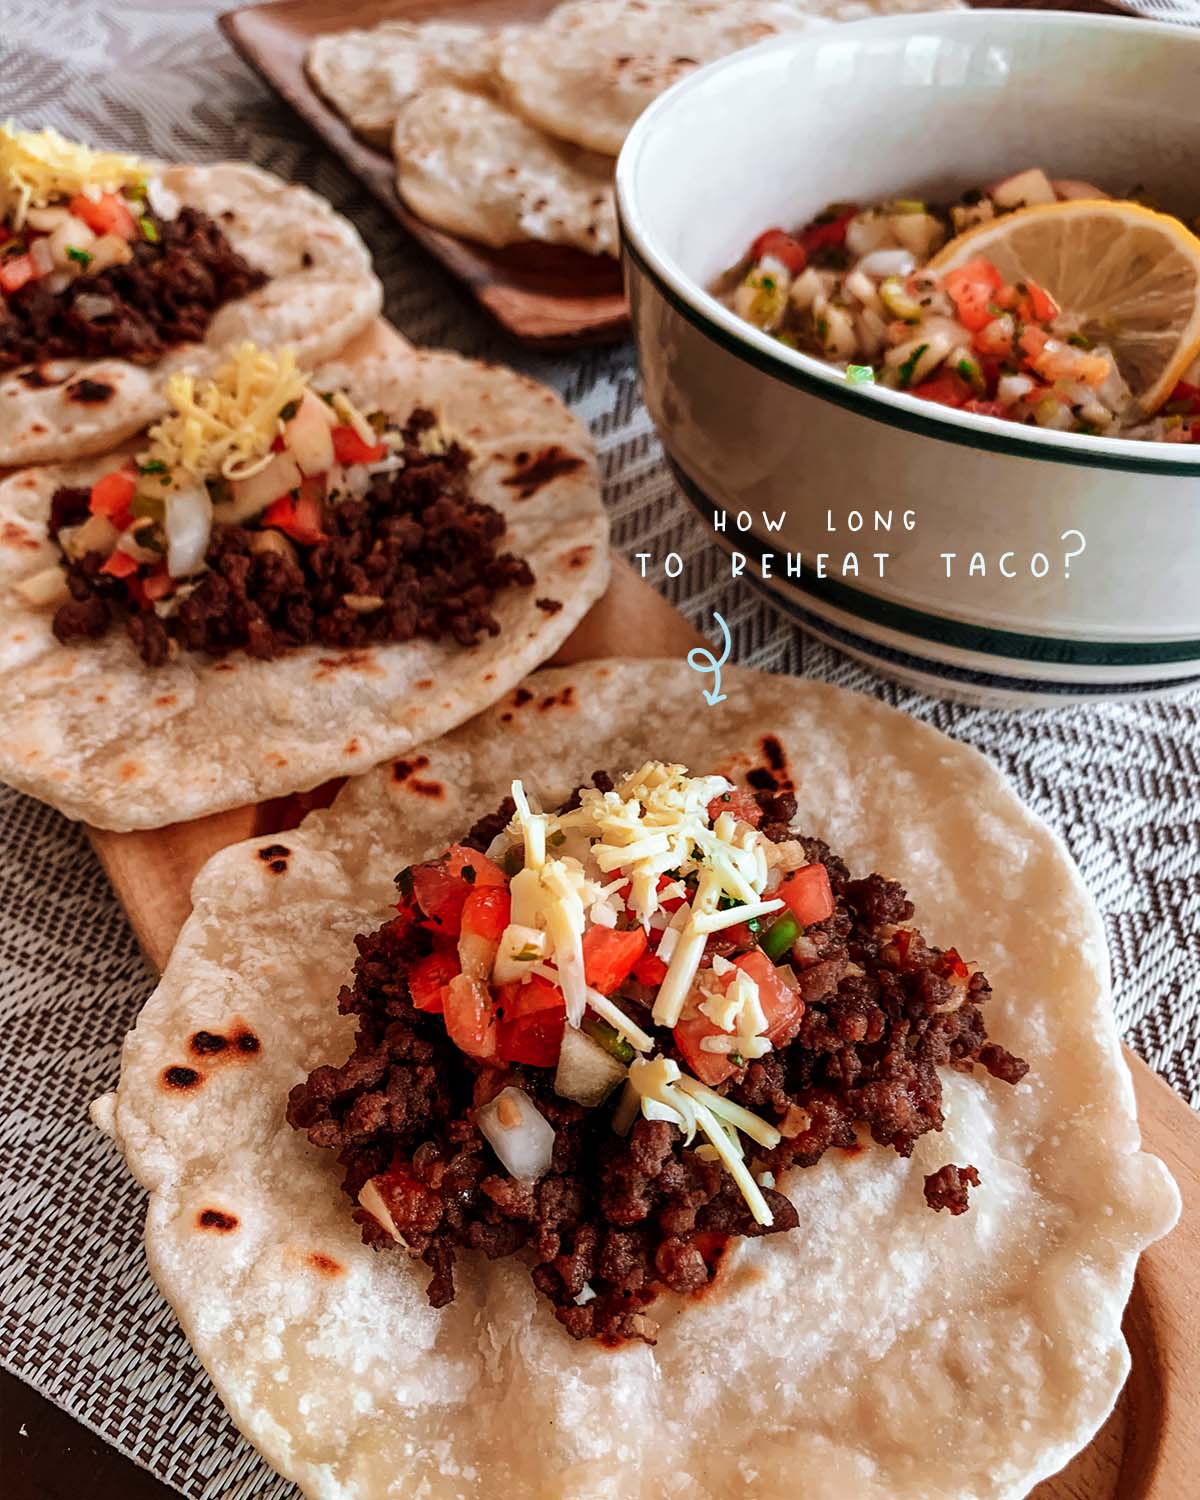 Timing is crucial when you reheat taco meat to prevent overcooking and drying. In general, it's best to reheat the meat for about 10 minutes over low heat.